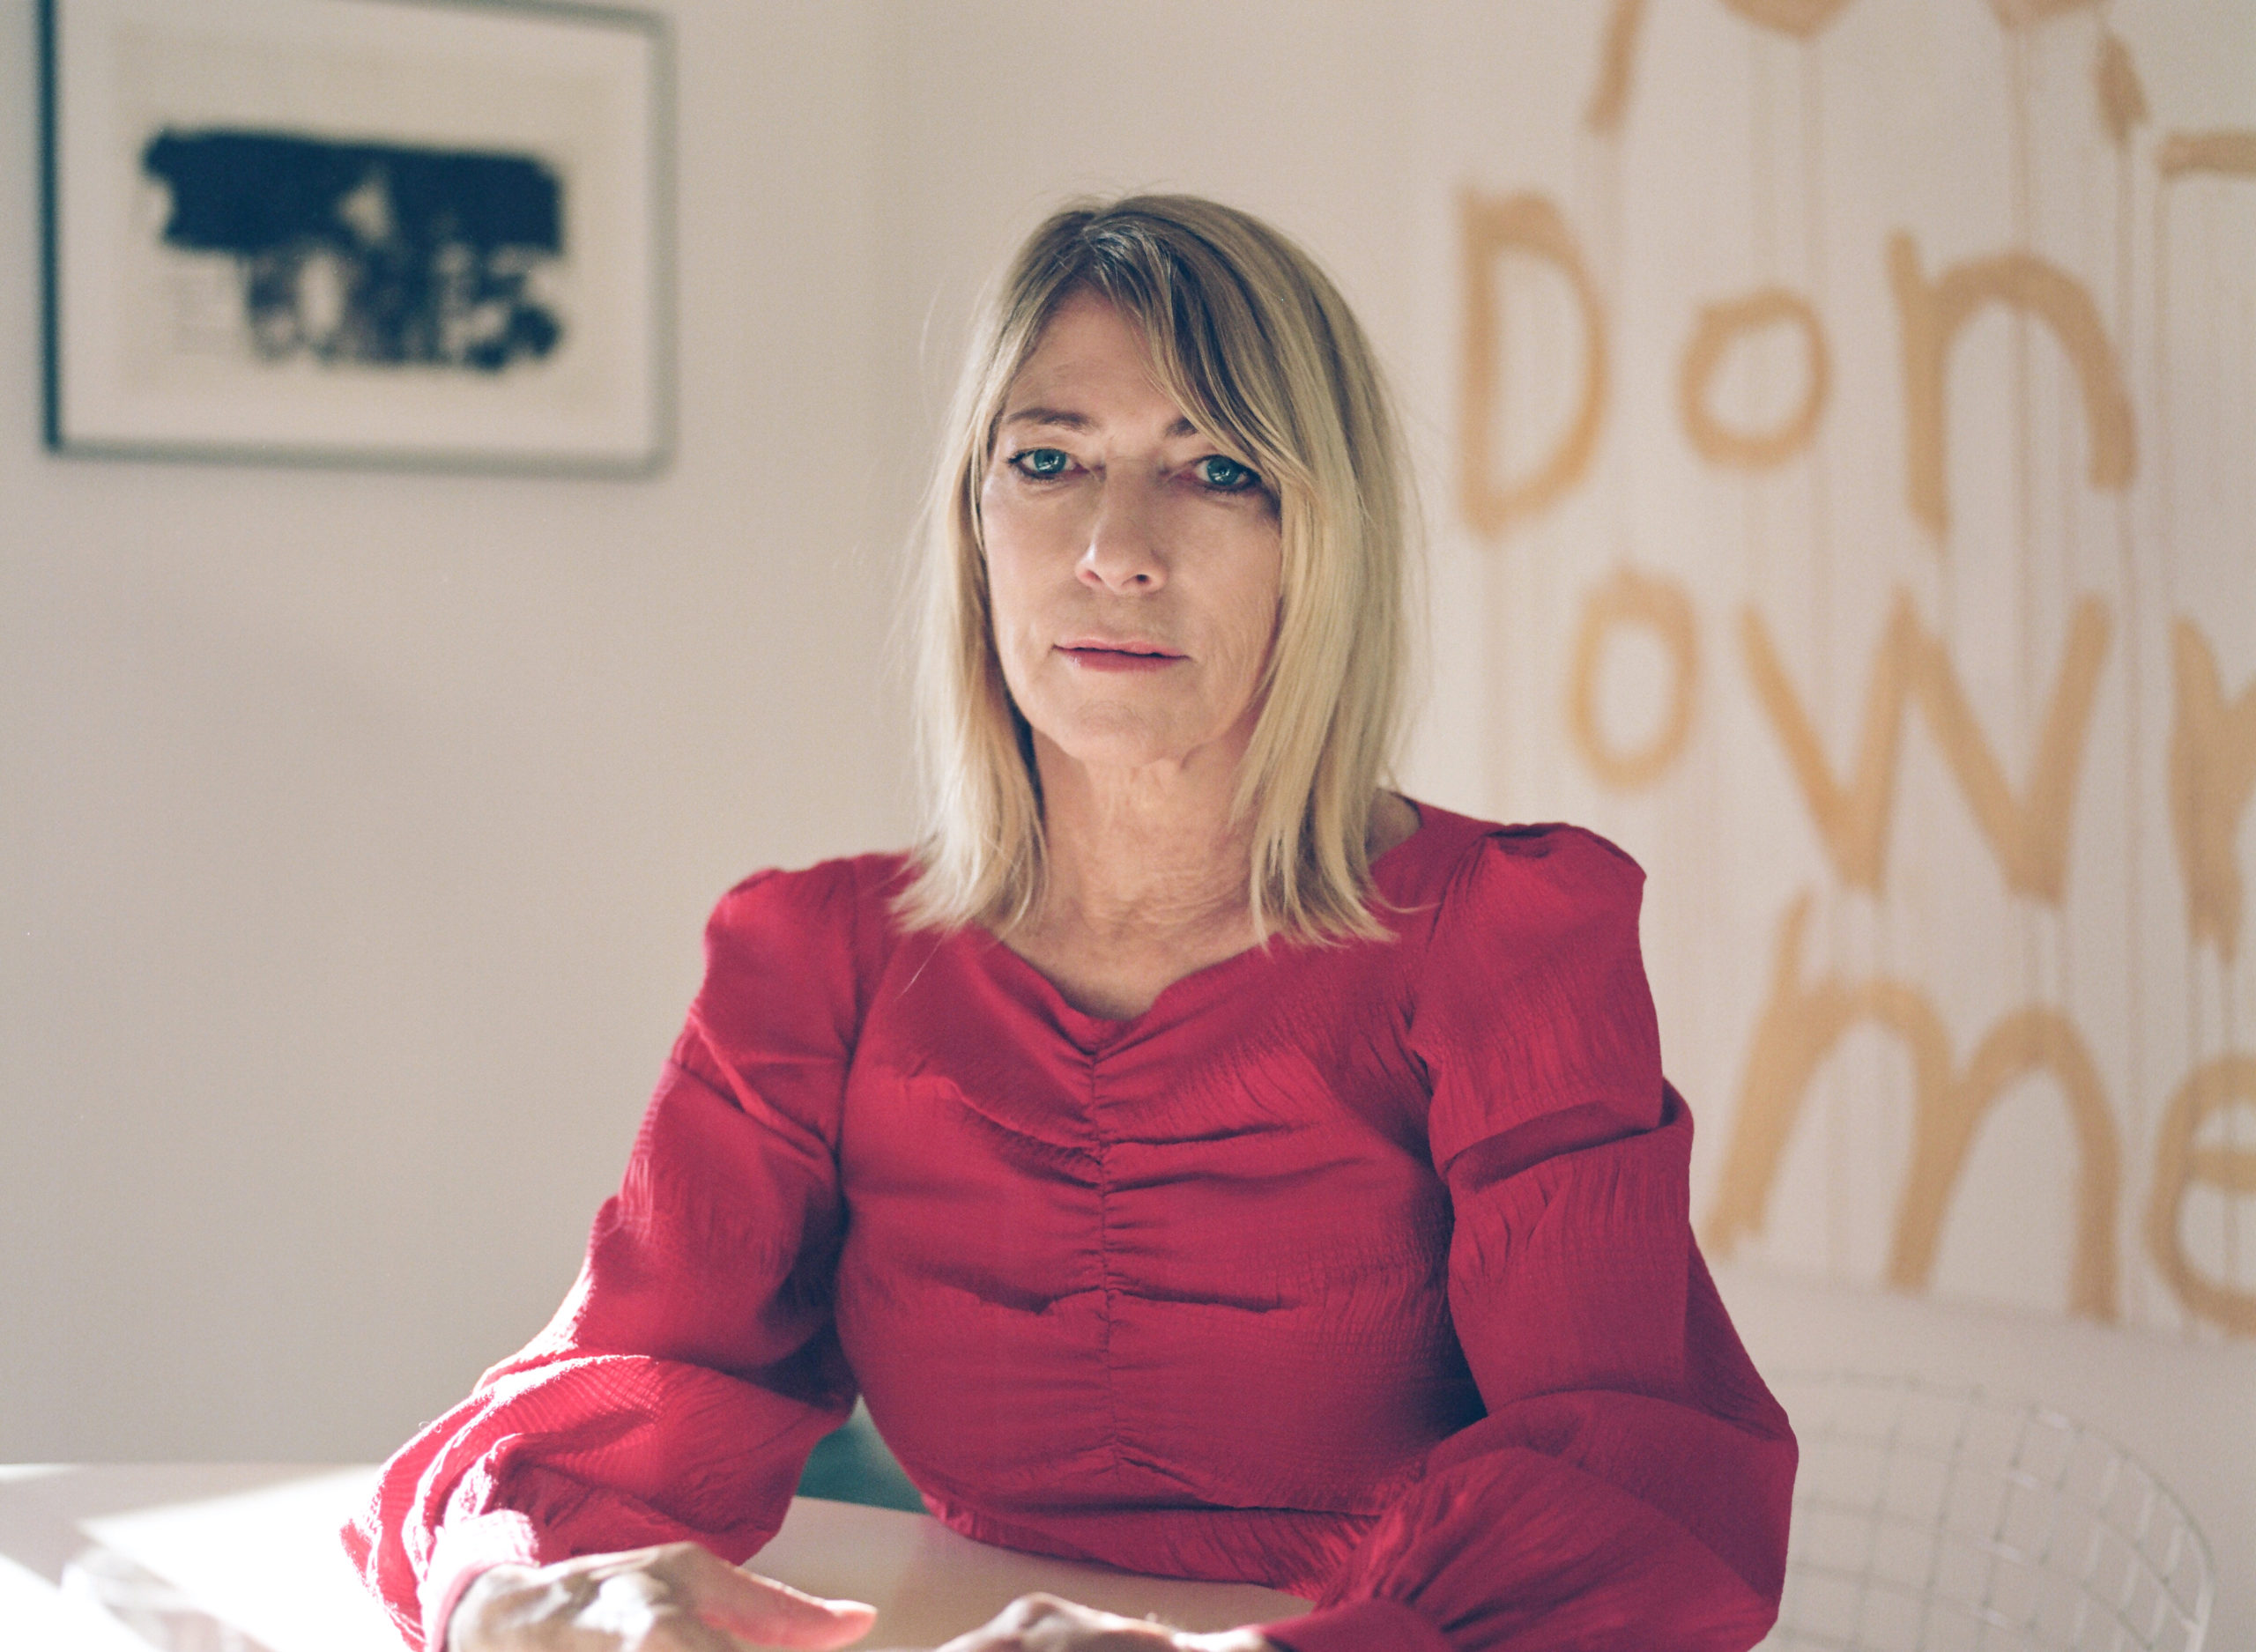 Kim Gordon & Erica Dawn Lyle & Vice Cooler collaborate on “Debt Collector” from LAND TRUST: Benefit for NEFOC, watch the video now